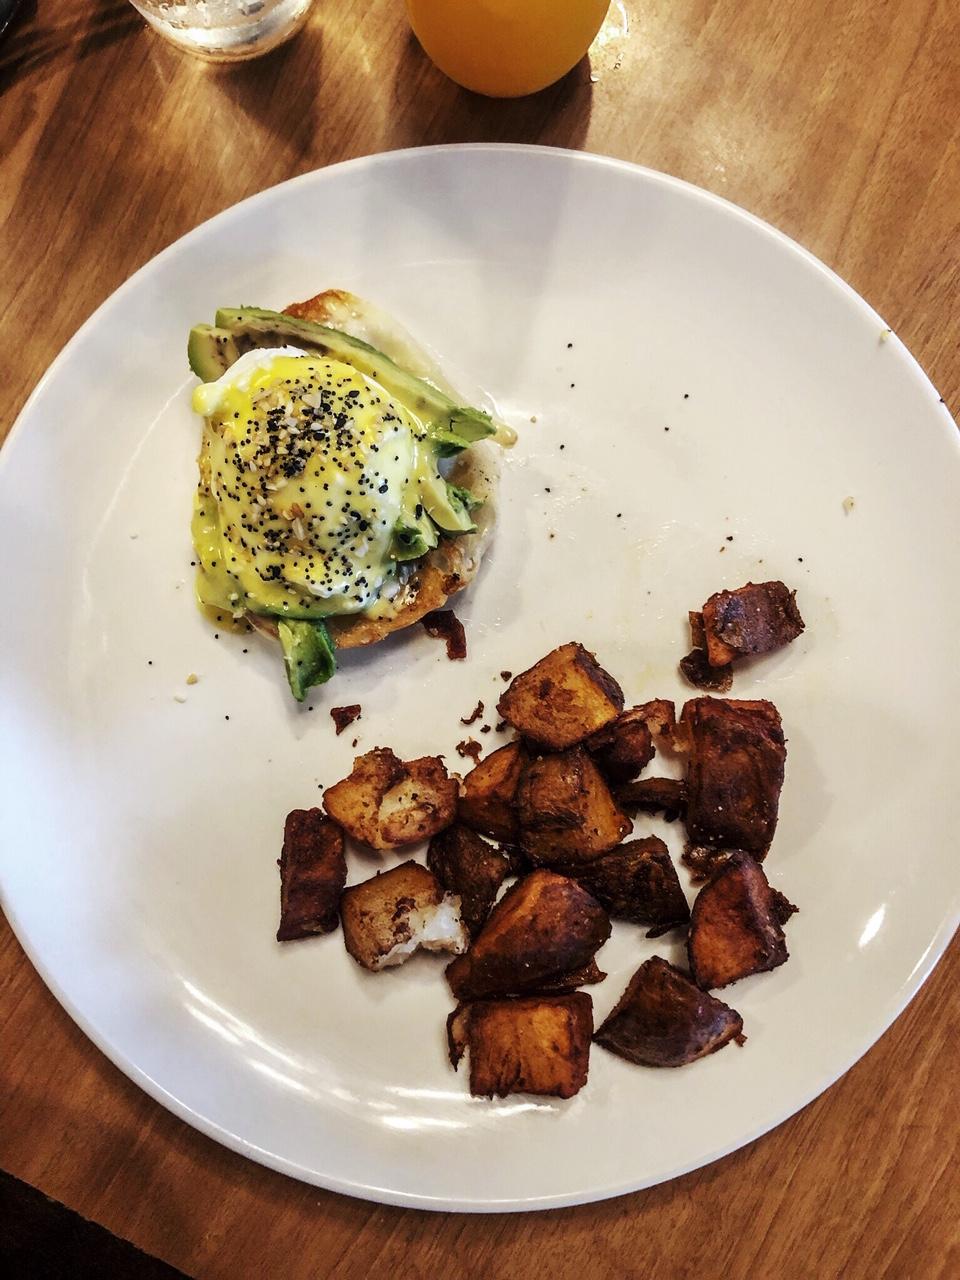 Why you should check out Megg's Cafe in Temple